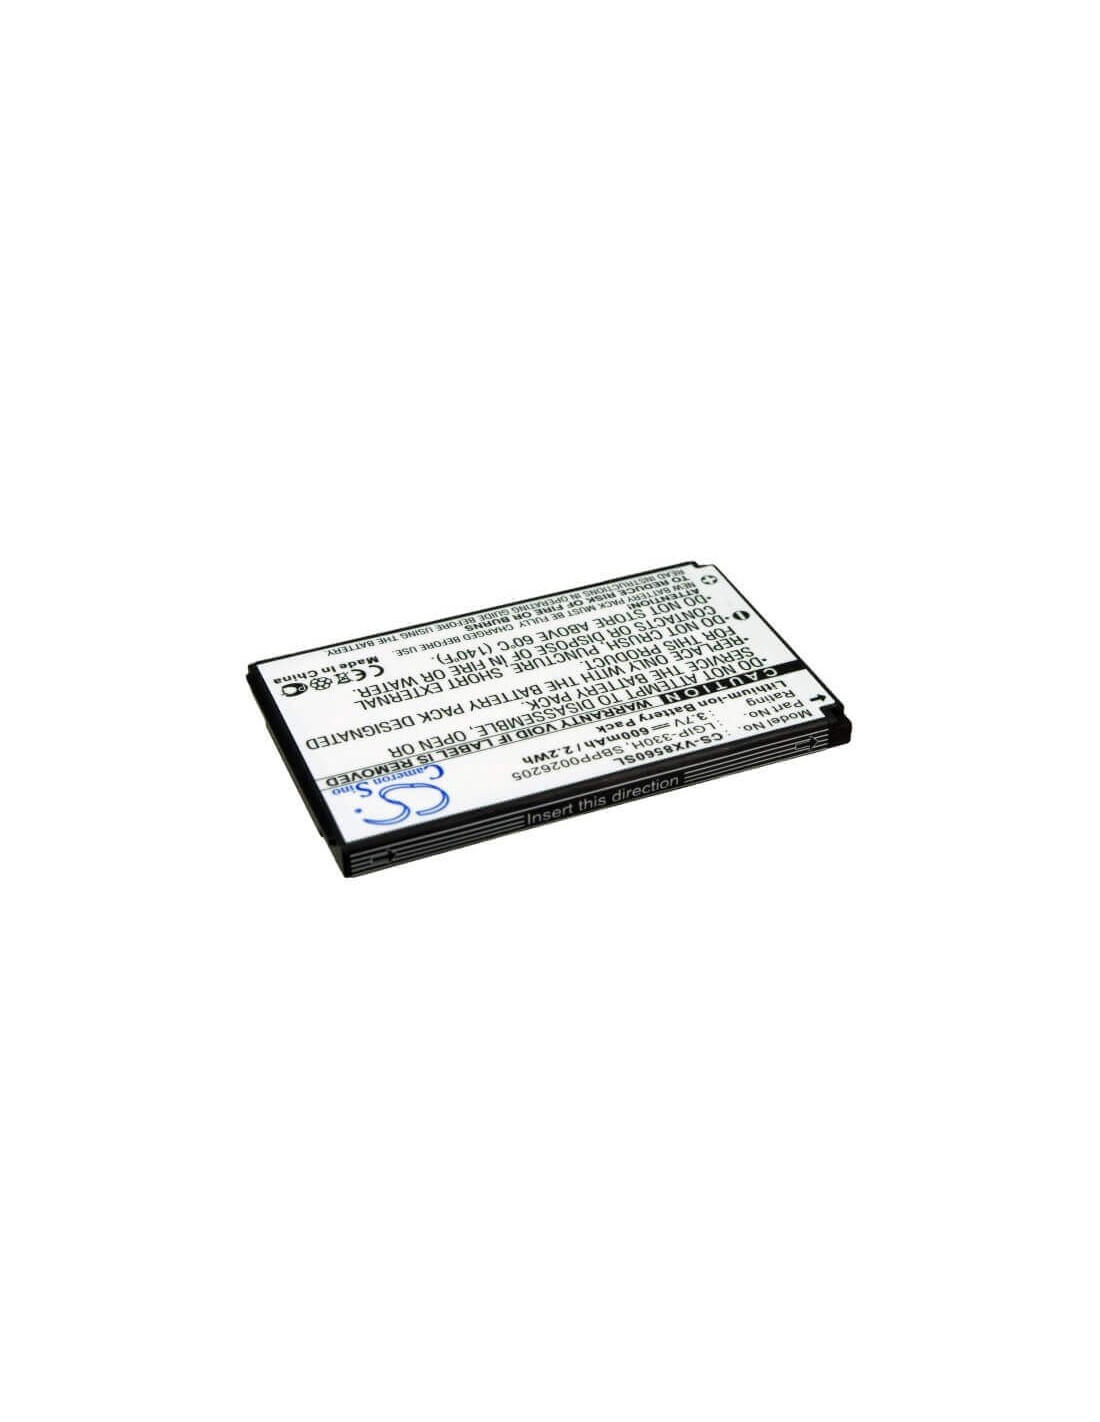 Battery for LG VX8560, Chocolate 3 3.7V, 600mAh - 2.22Wh